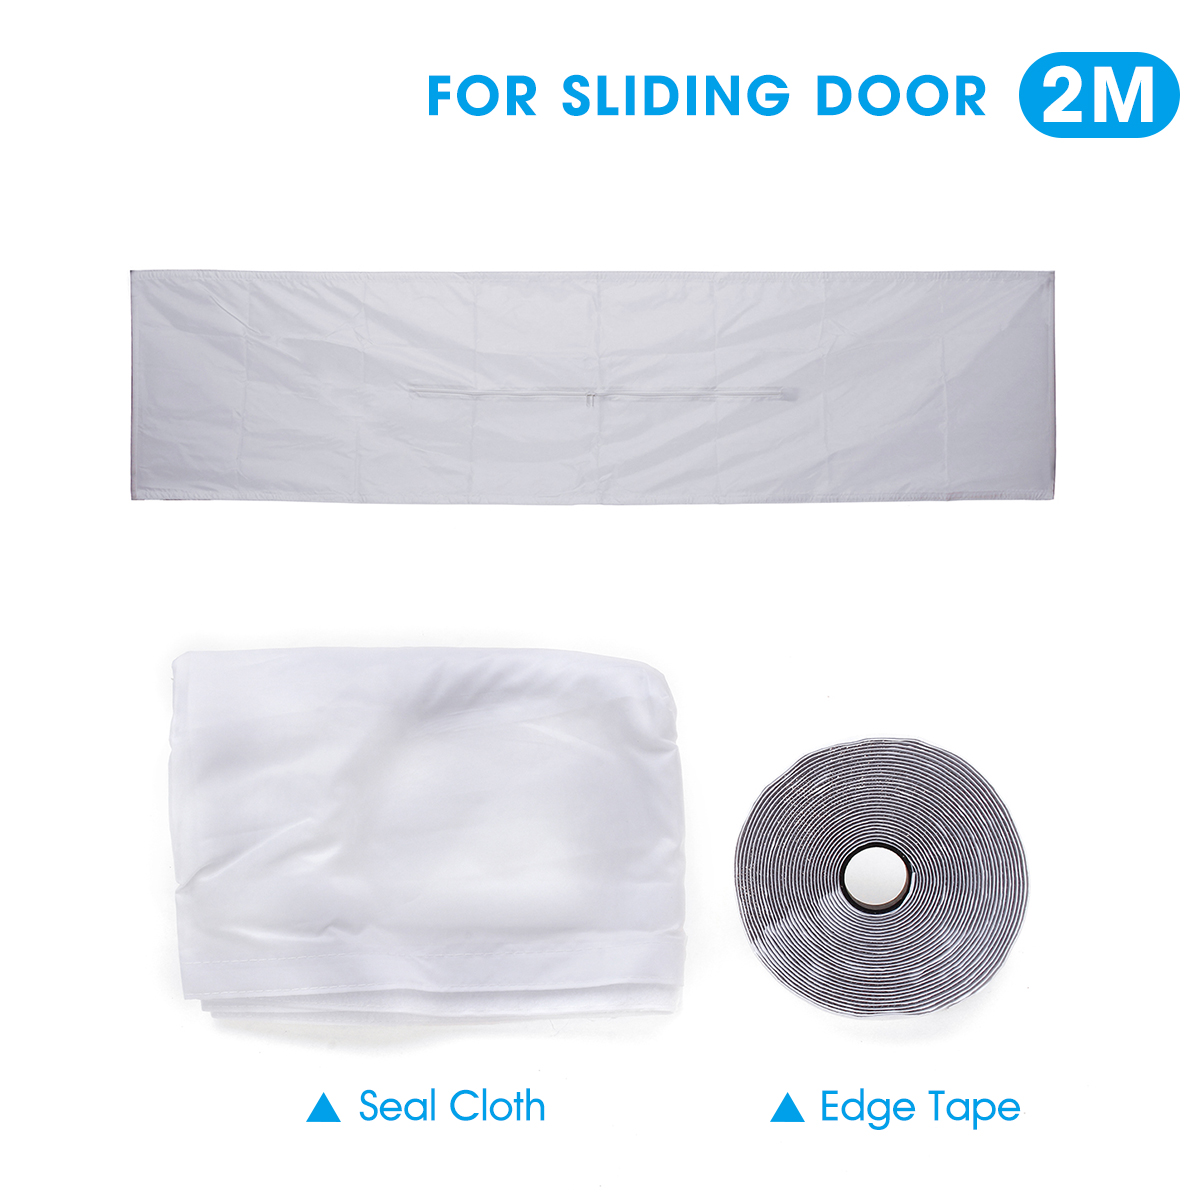 Window-Sliding-Door-Seal-Cloth-with-Adhesive-Tape-Air-Locking-For-Portable-Air-Conditioners-1483890-2